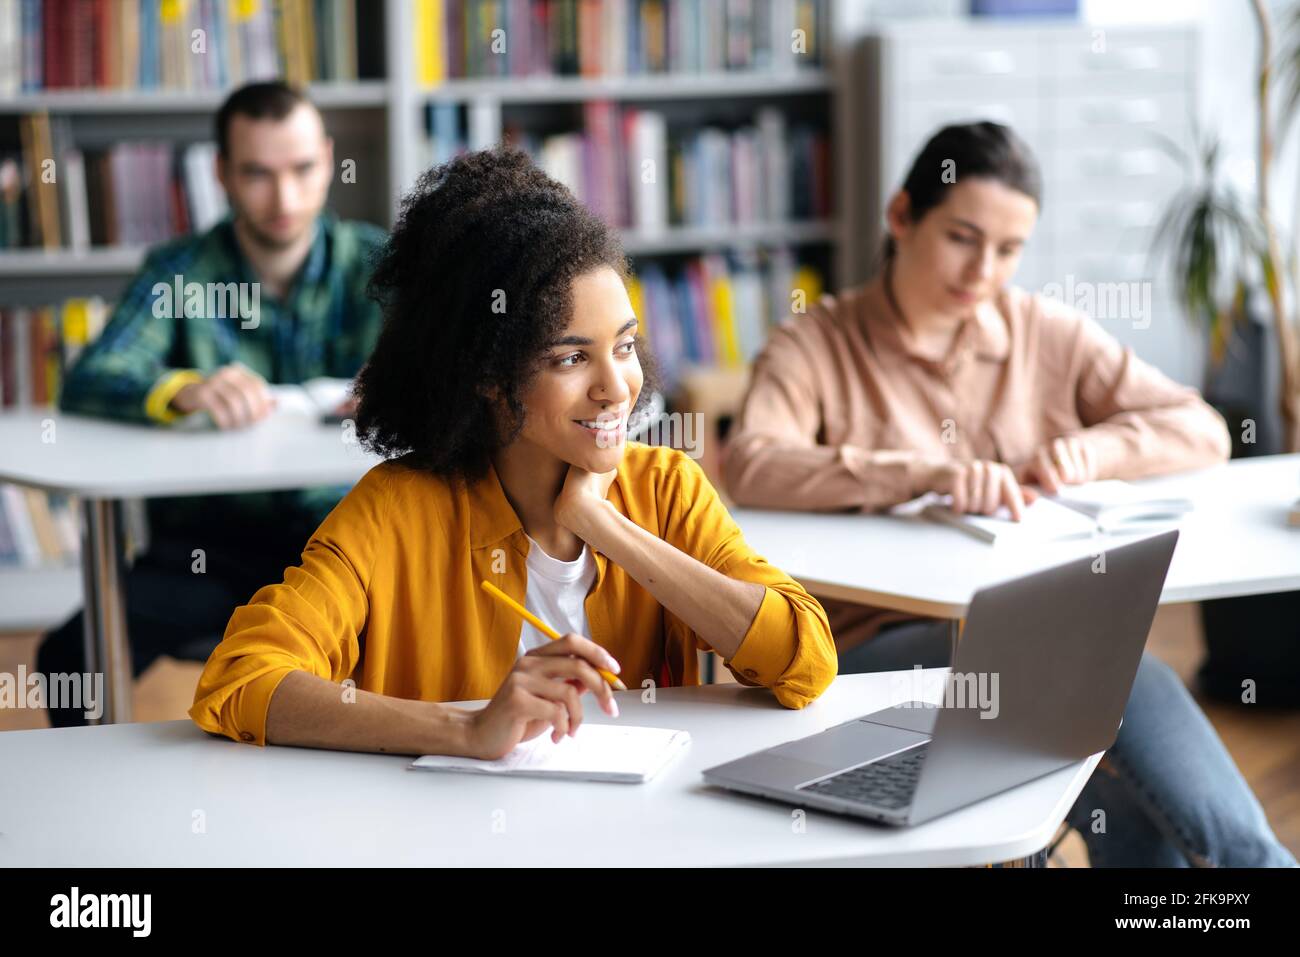 Joyful smart cute young african american female student, in casual informal clothes, sitting at table in university library with laptop while preparing for lessons or exam, taking notes, smiling Stock Photo